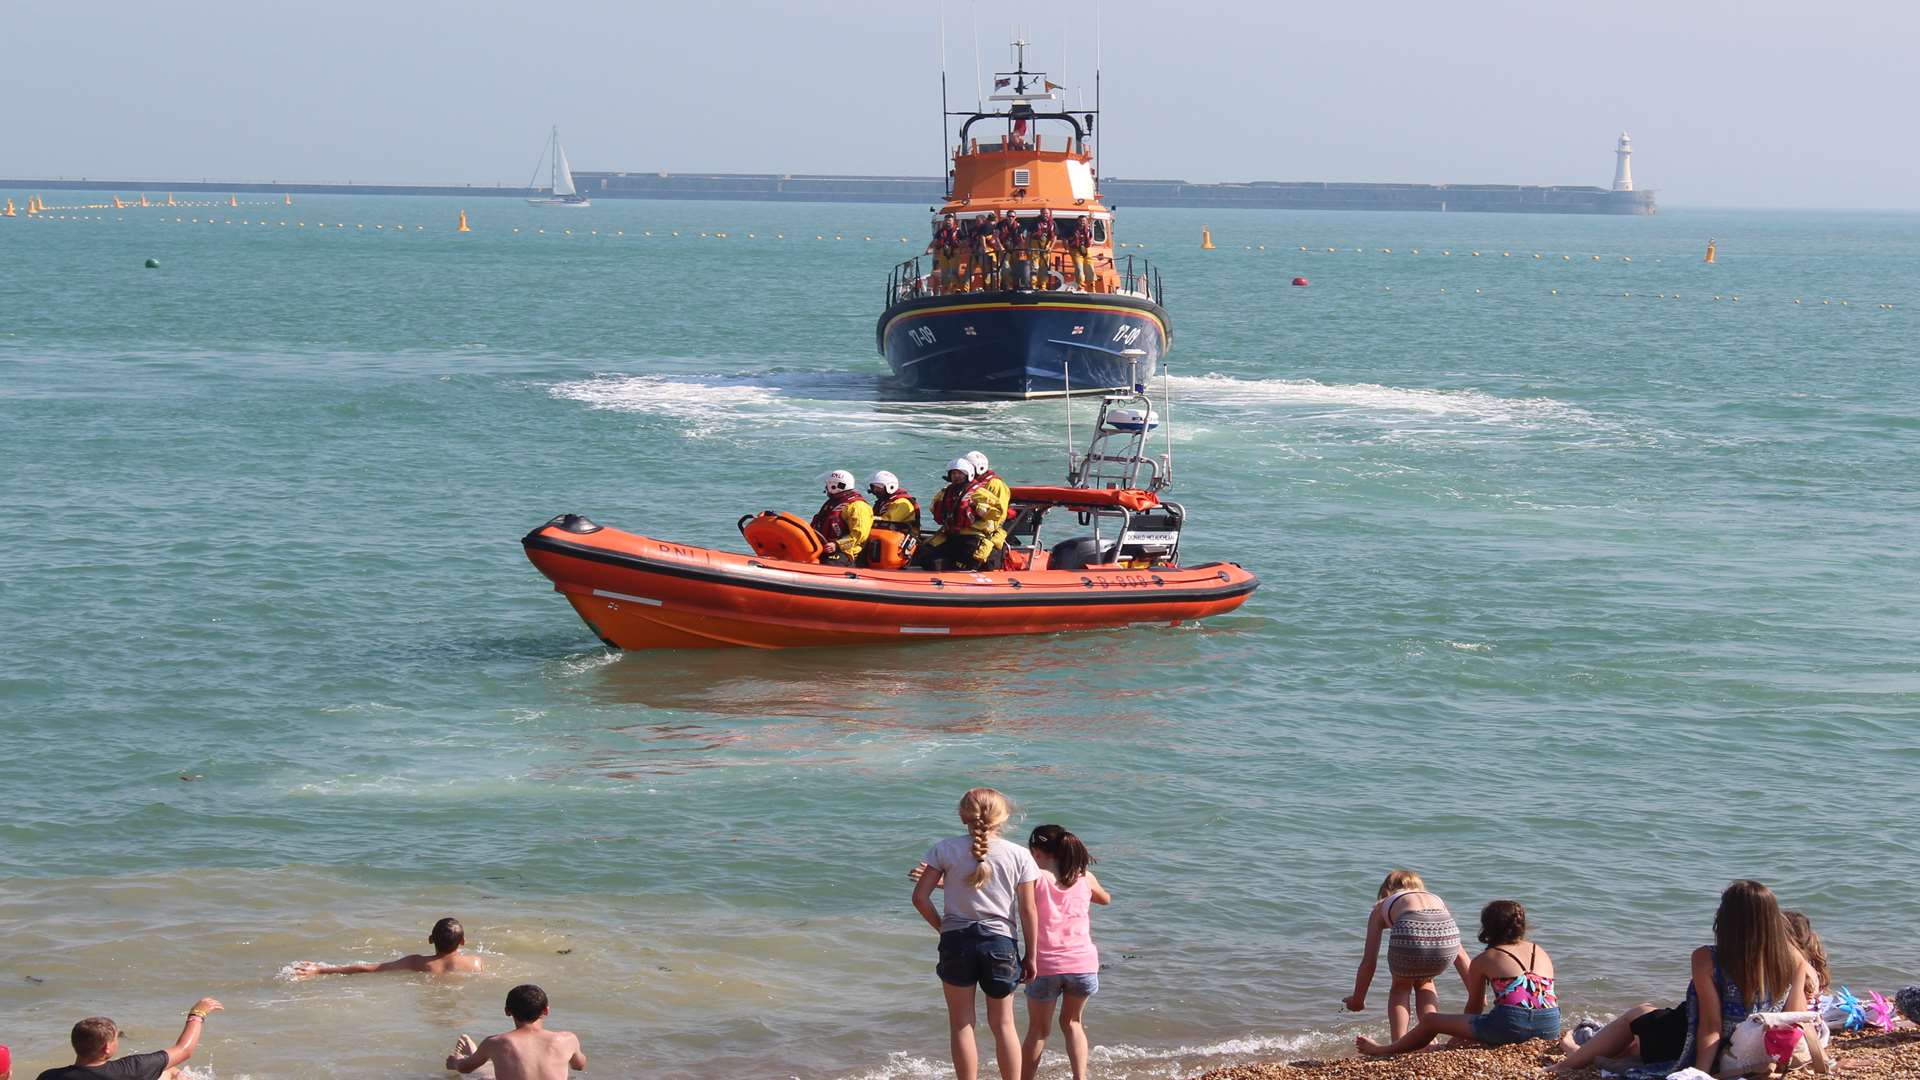 The RNLI display at the Dover regatta. Picture courtesy of the Port of Dover